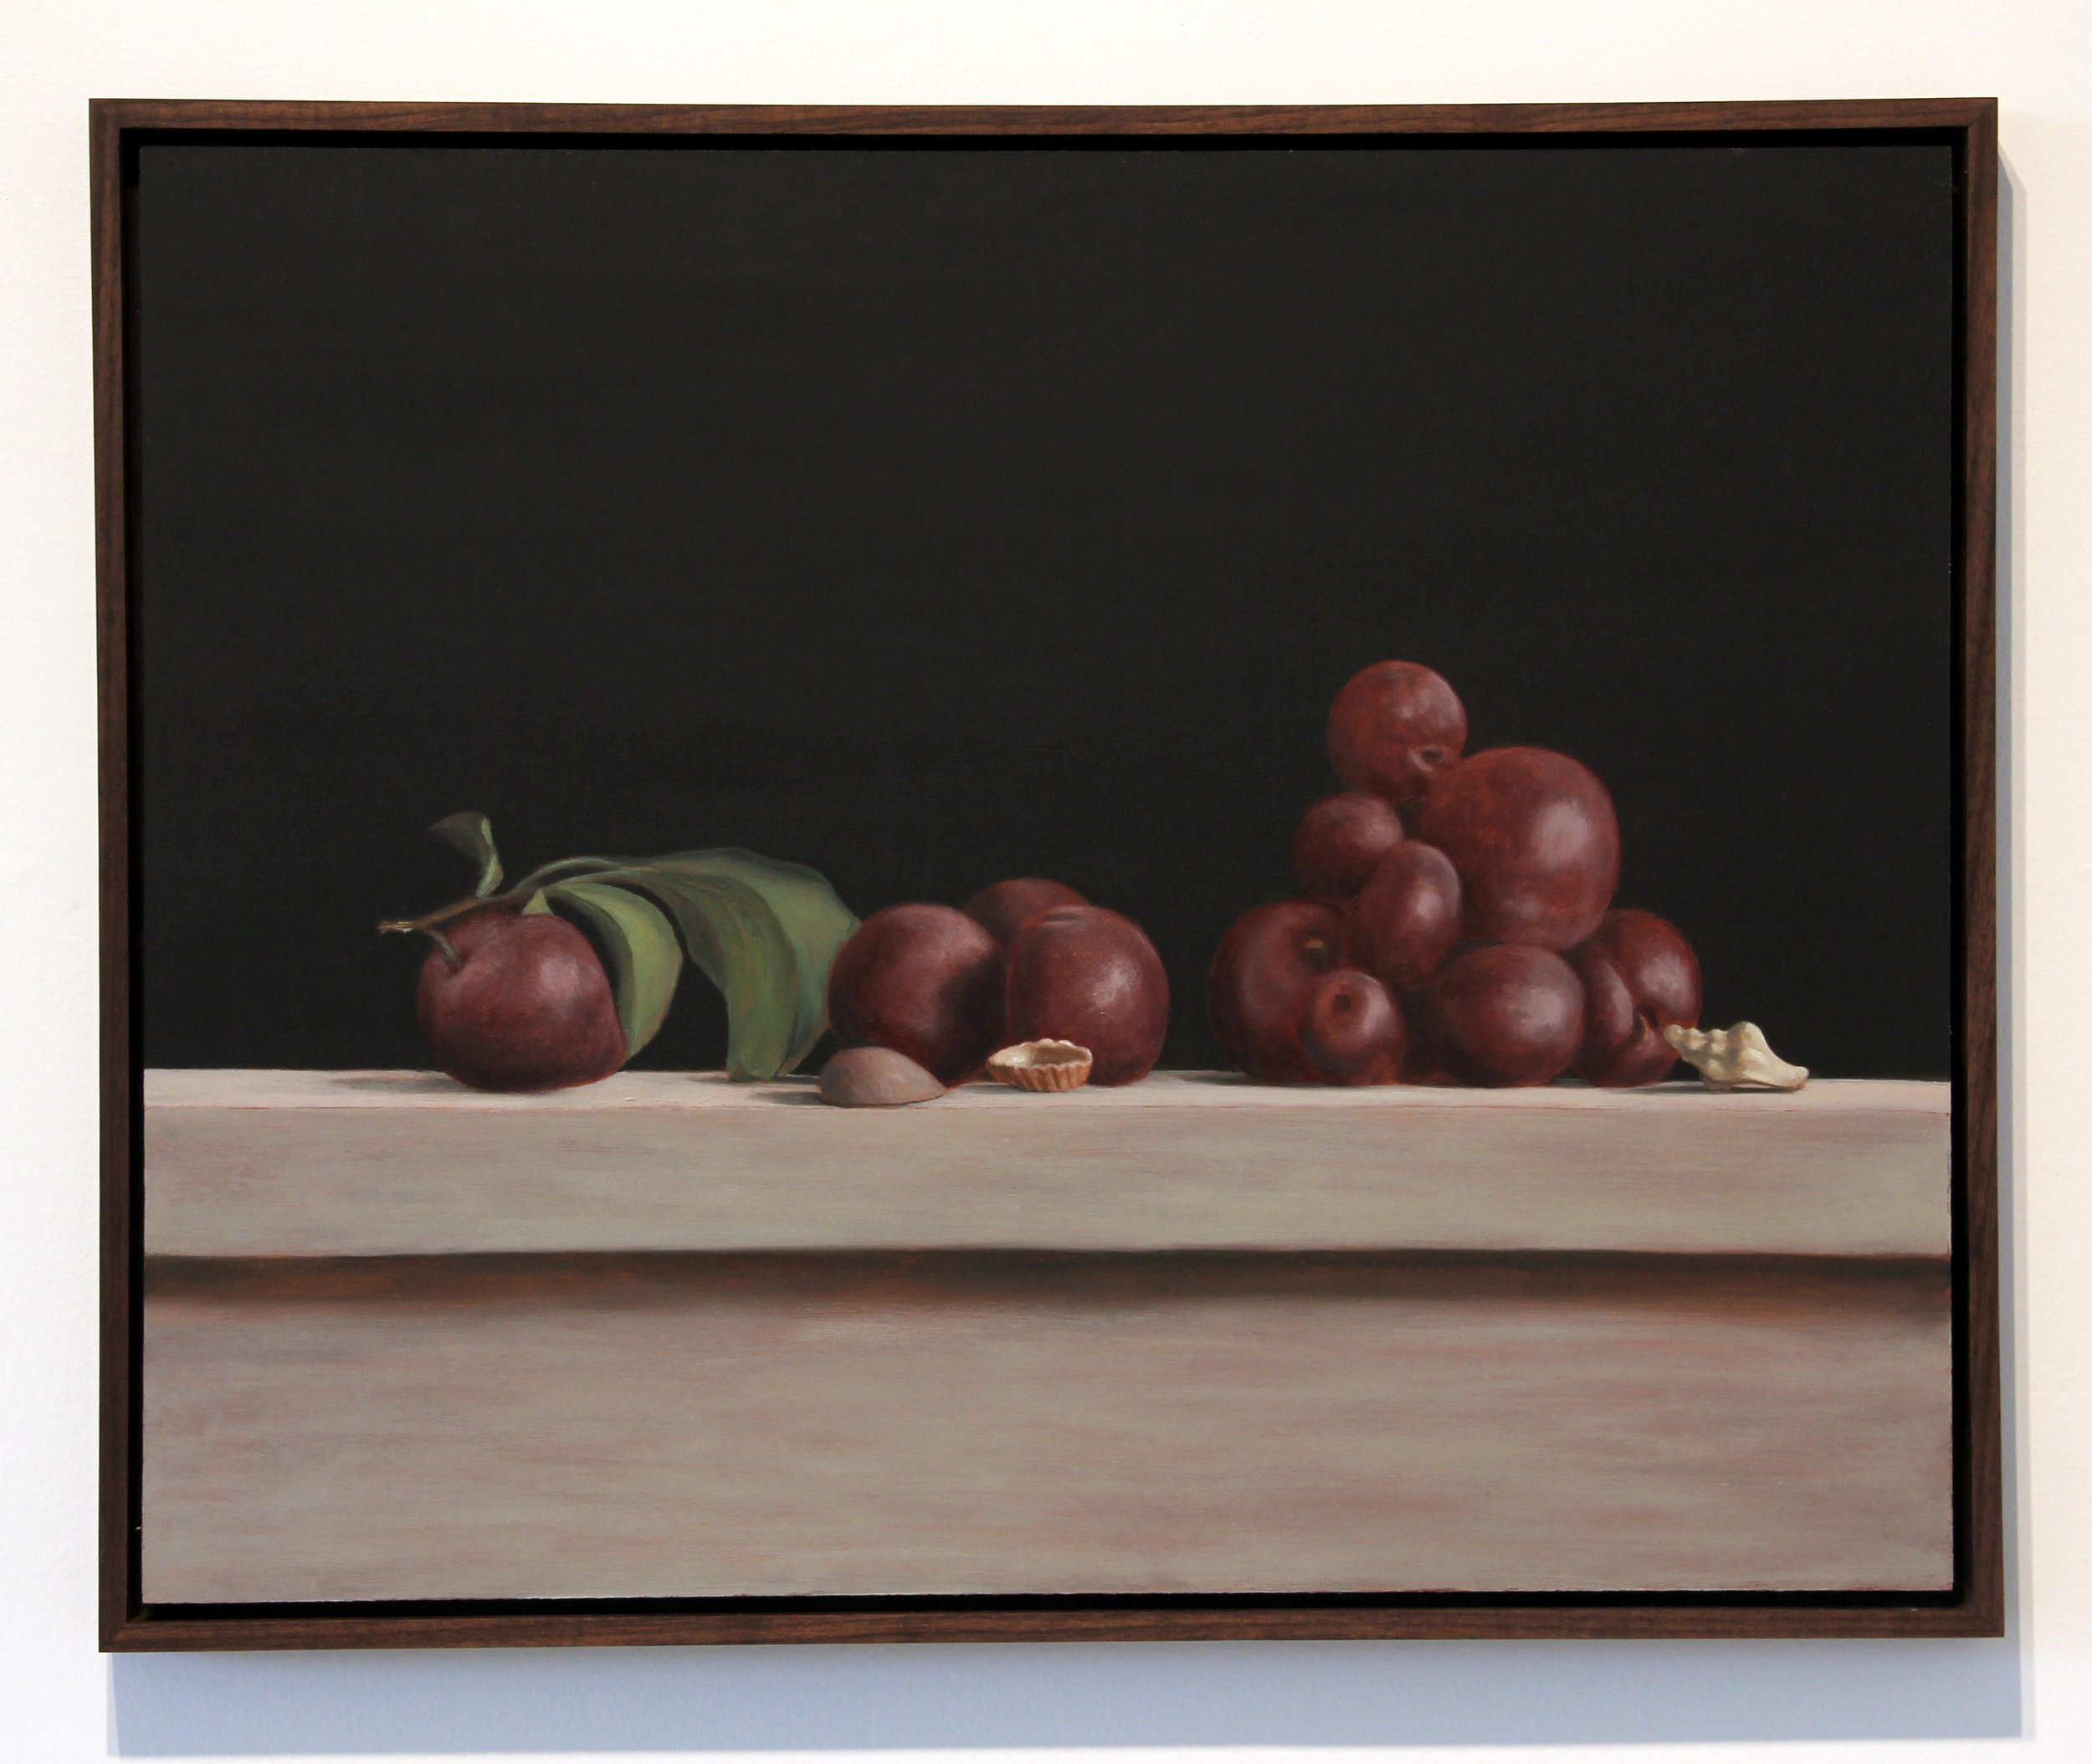 Plums, 2023. Oil on copper panel. 16 x 20"